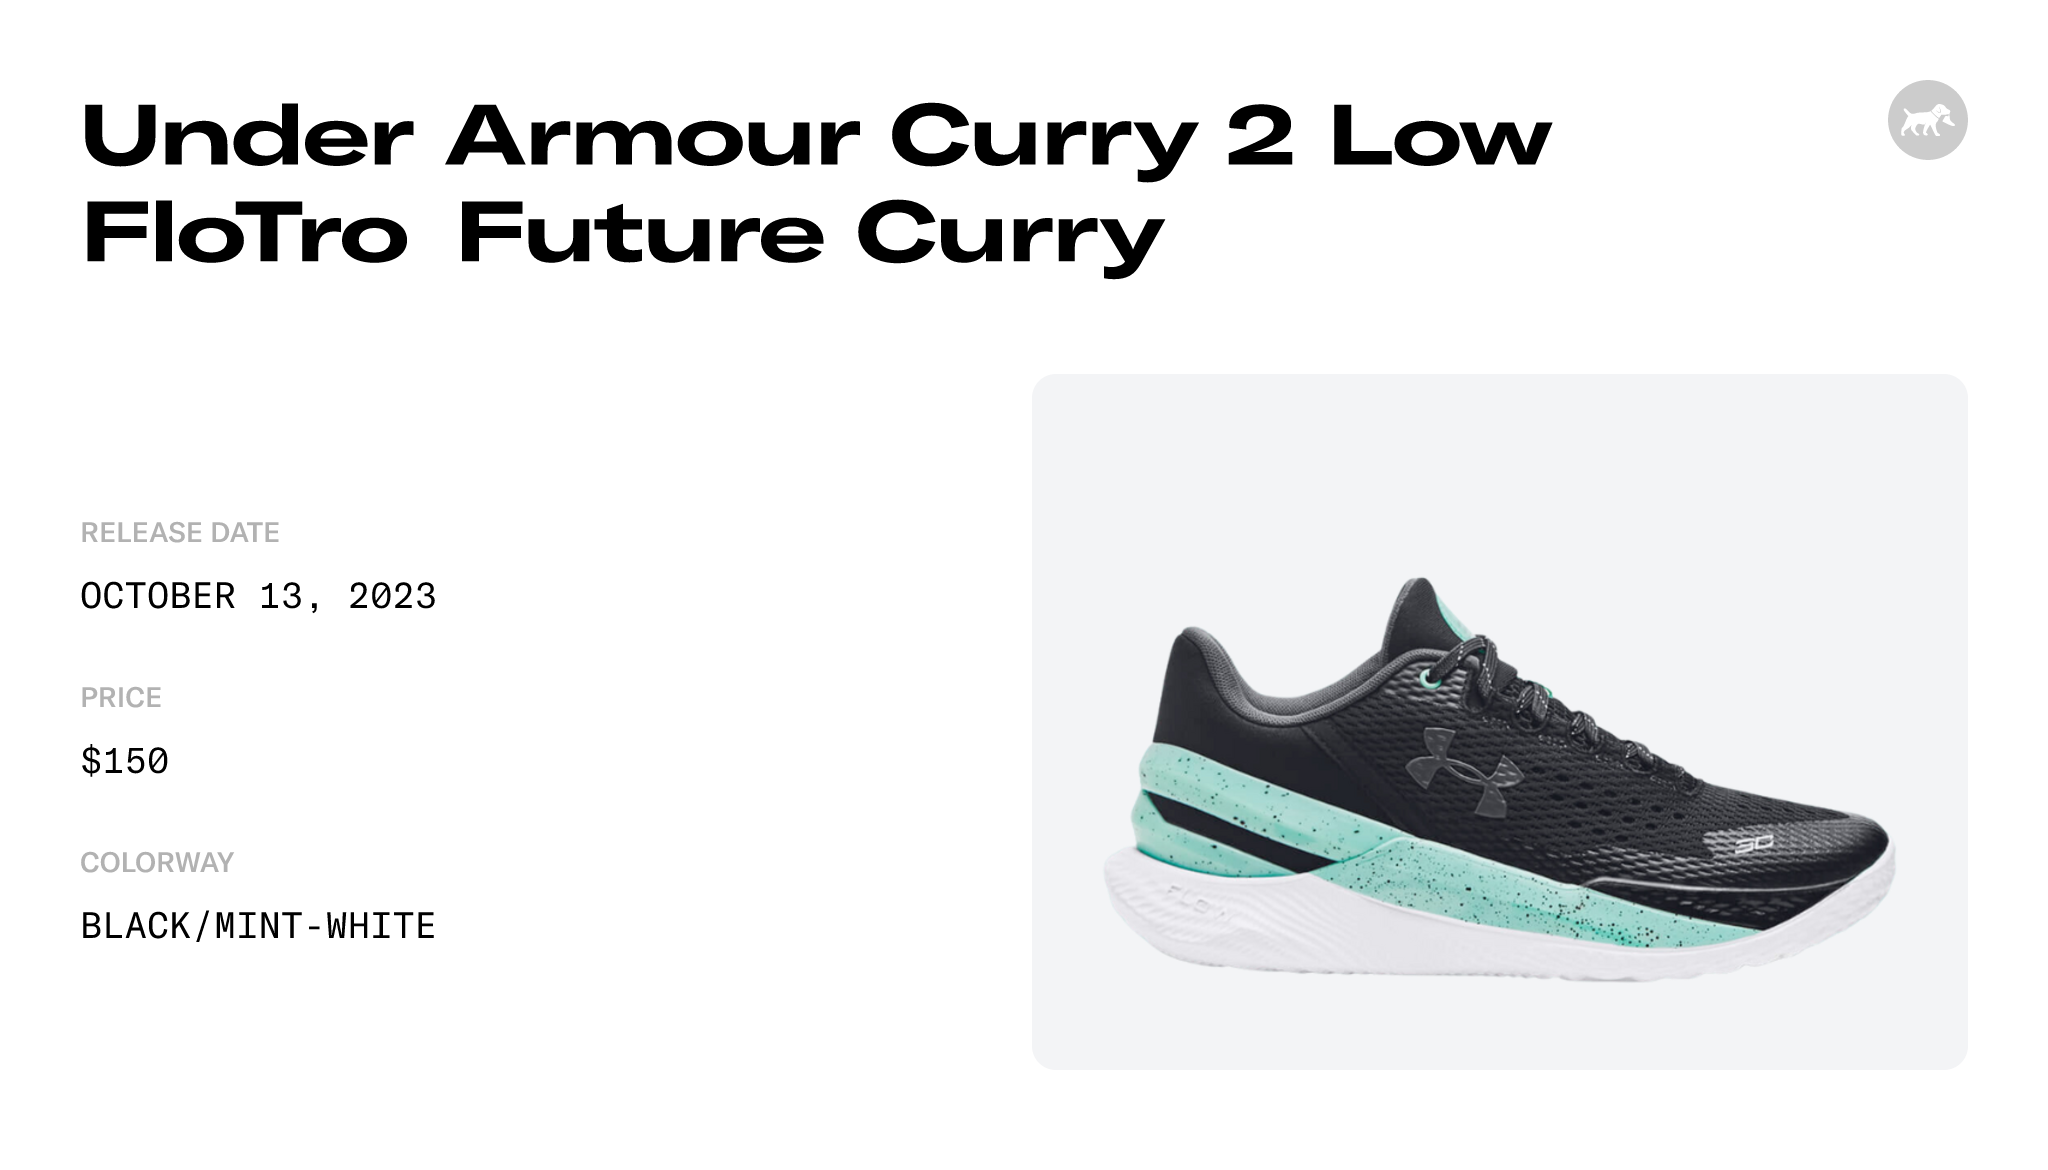 Under Armor Curry 2 Low Flotro Shoes - 3026276-001